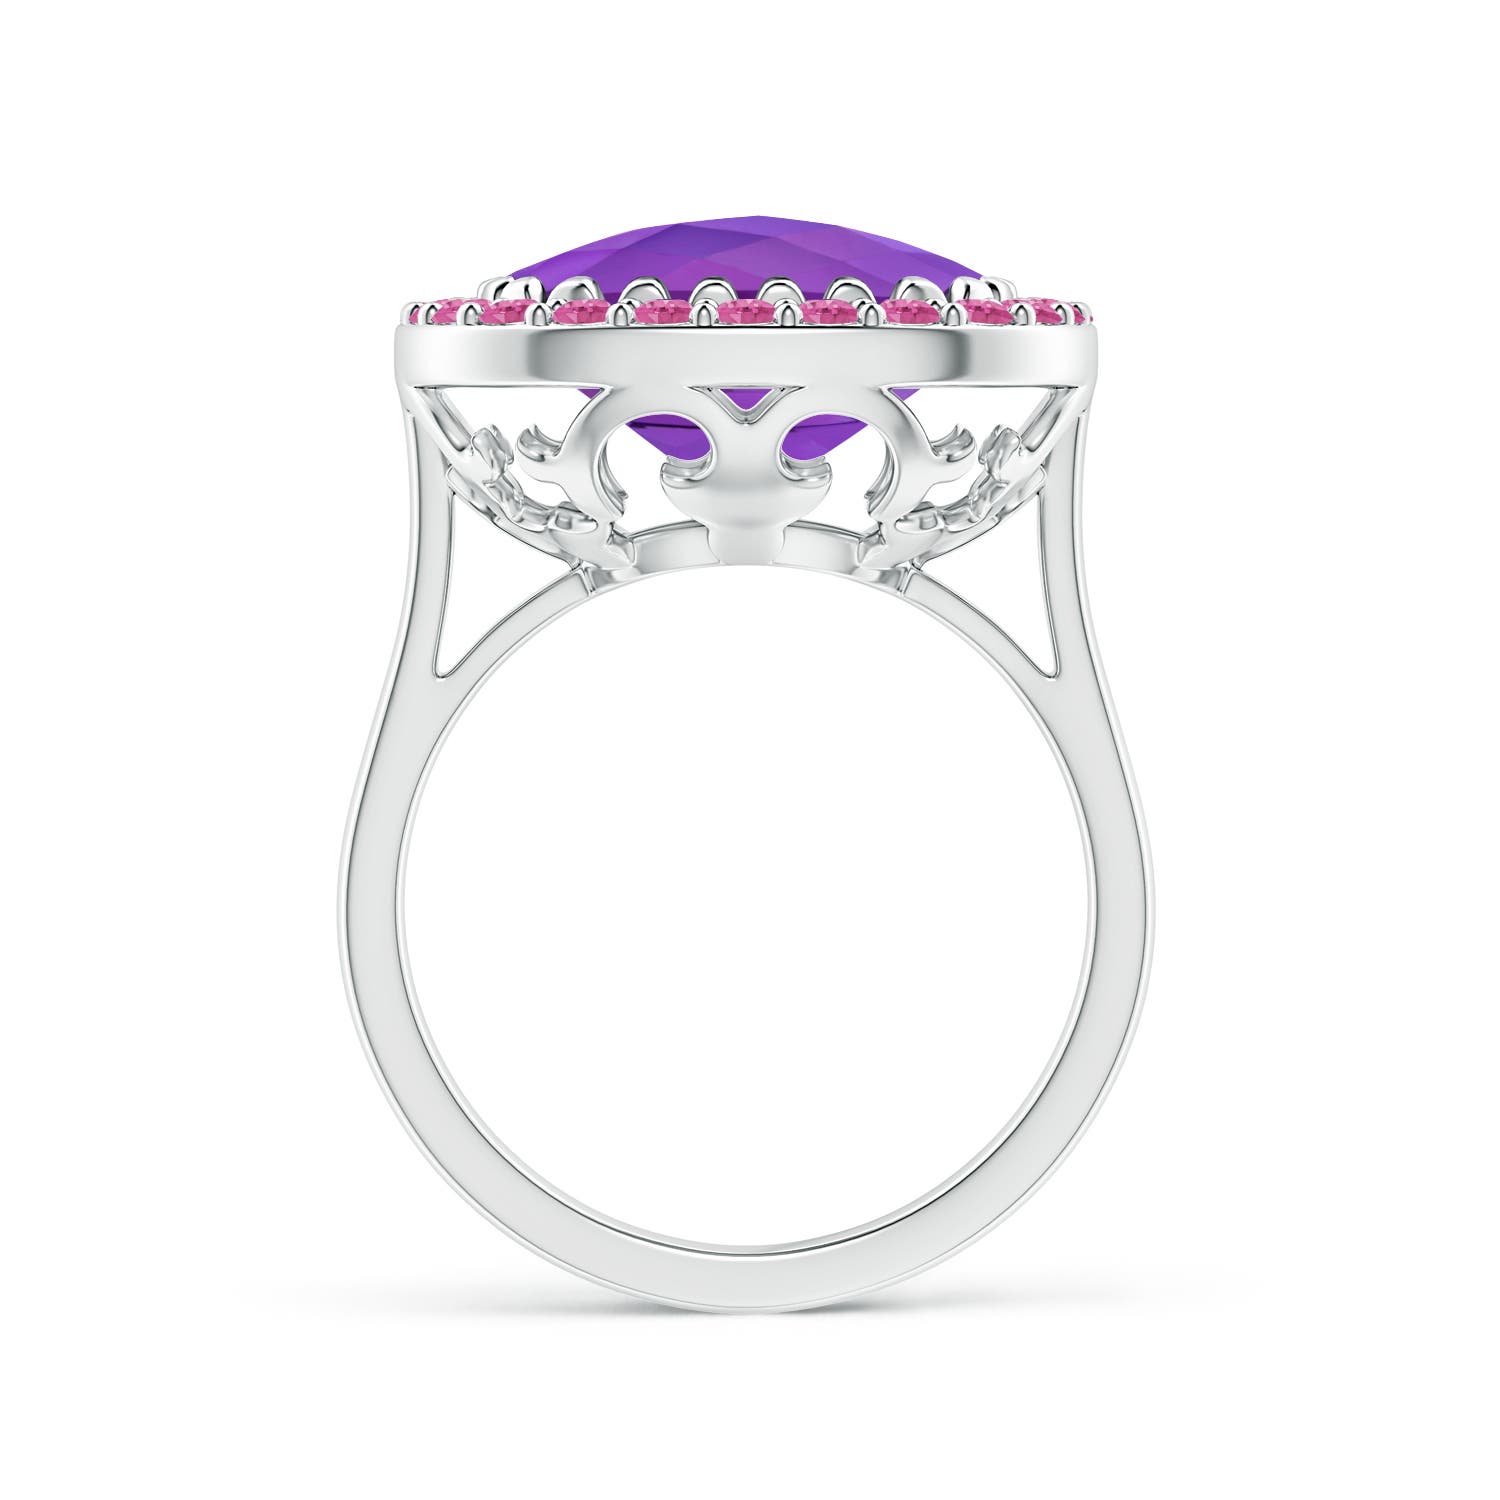 AAA - Amethyst / 6.98 CT / 14 KT White Gold